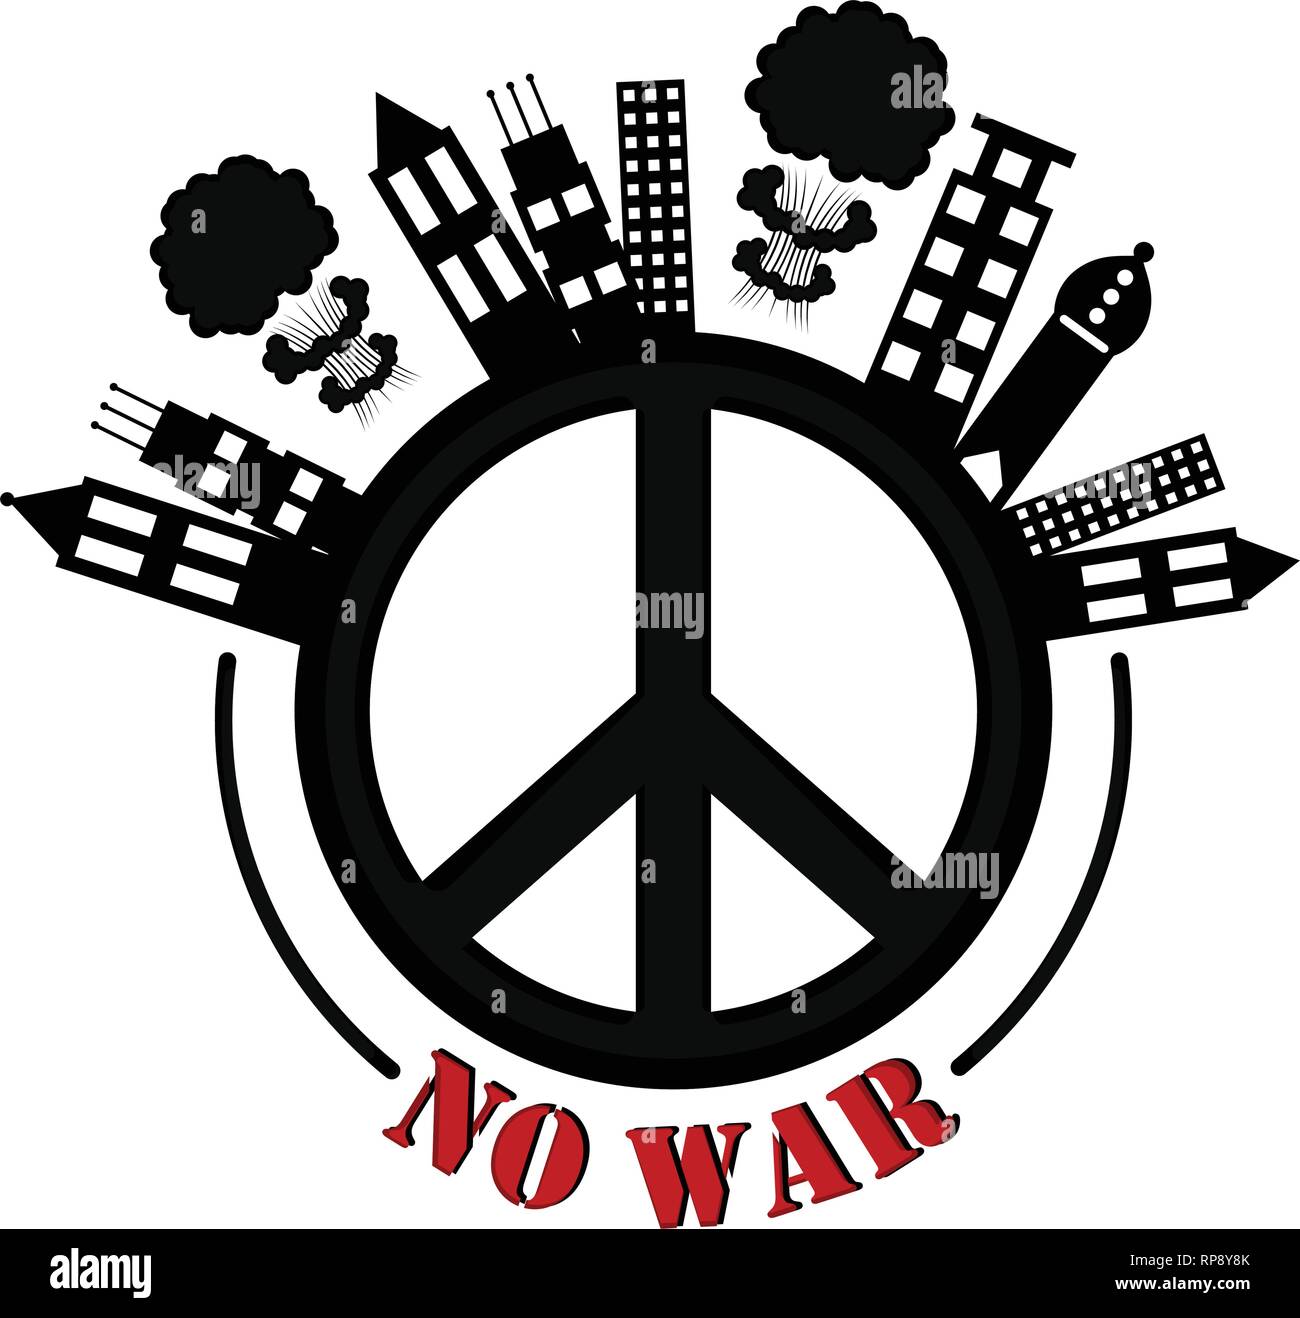 No war banner with a peace symbol and buildings Stock Vector